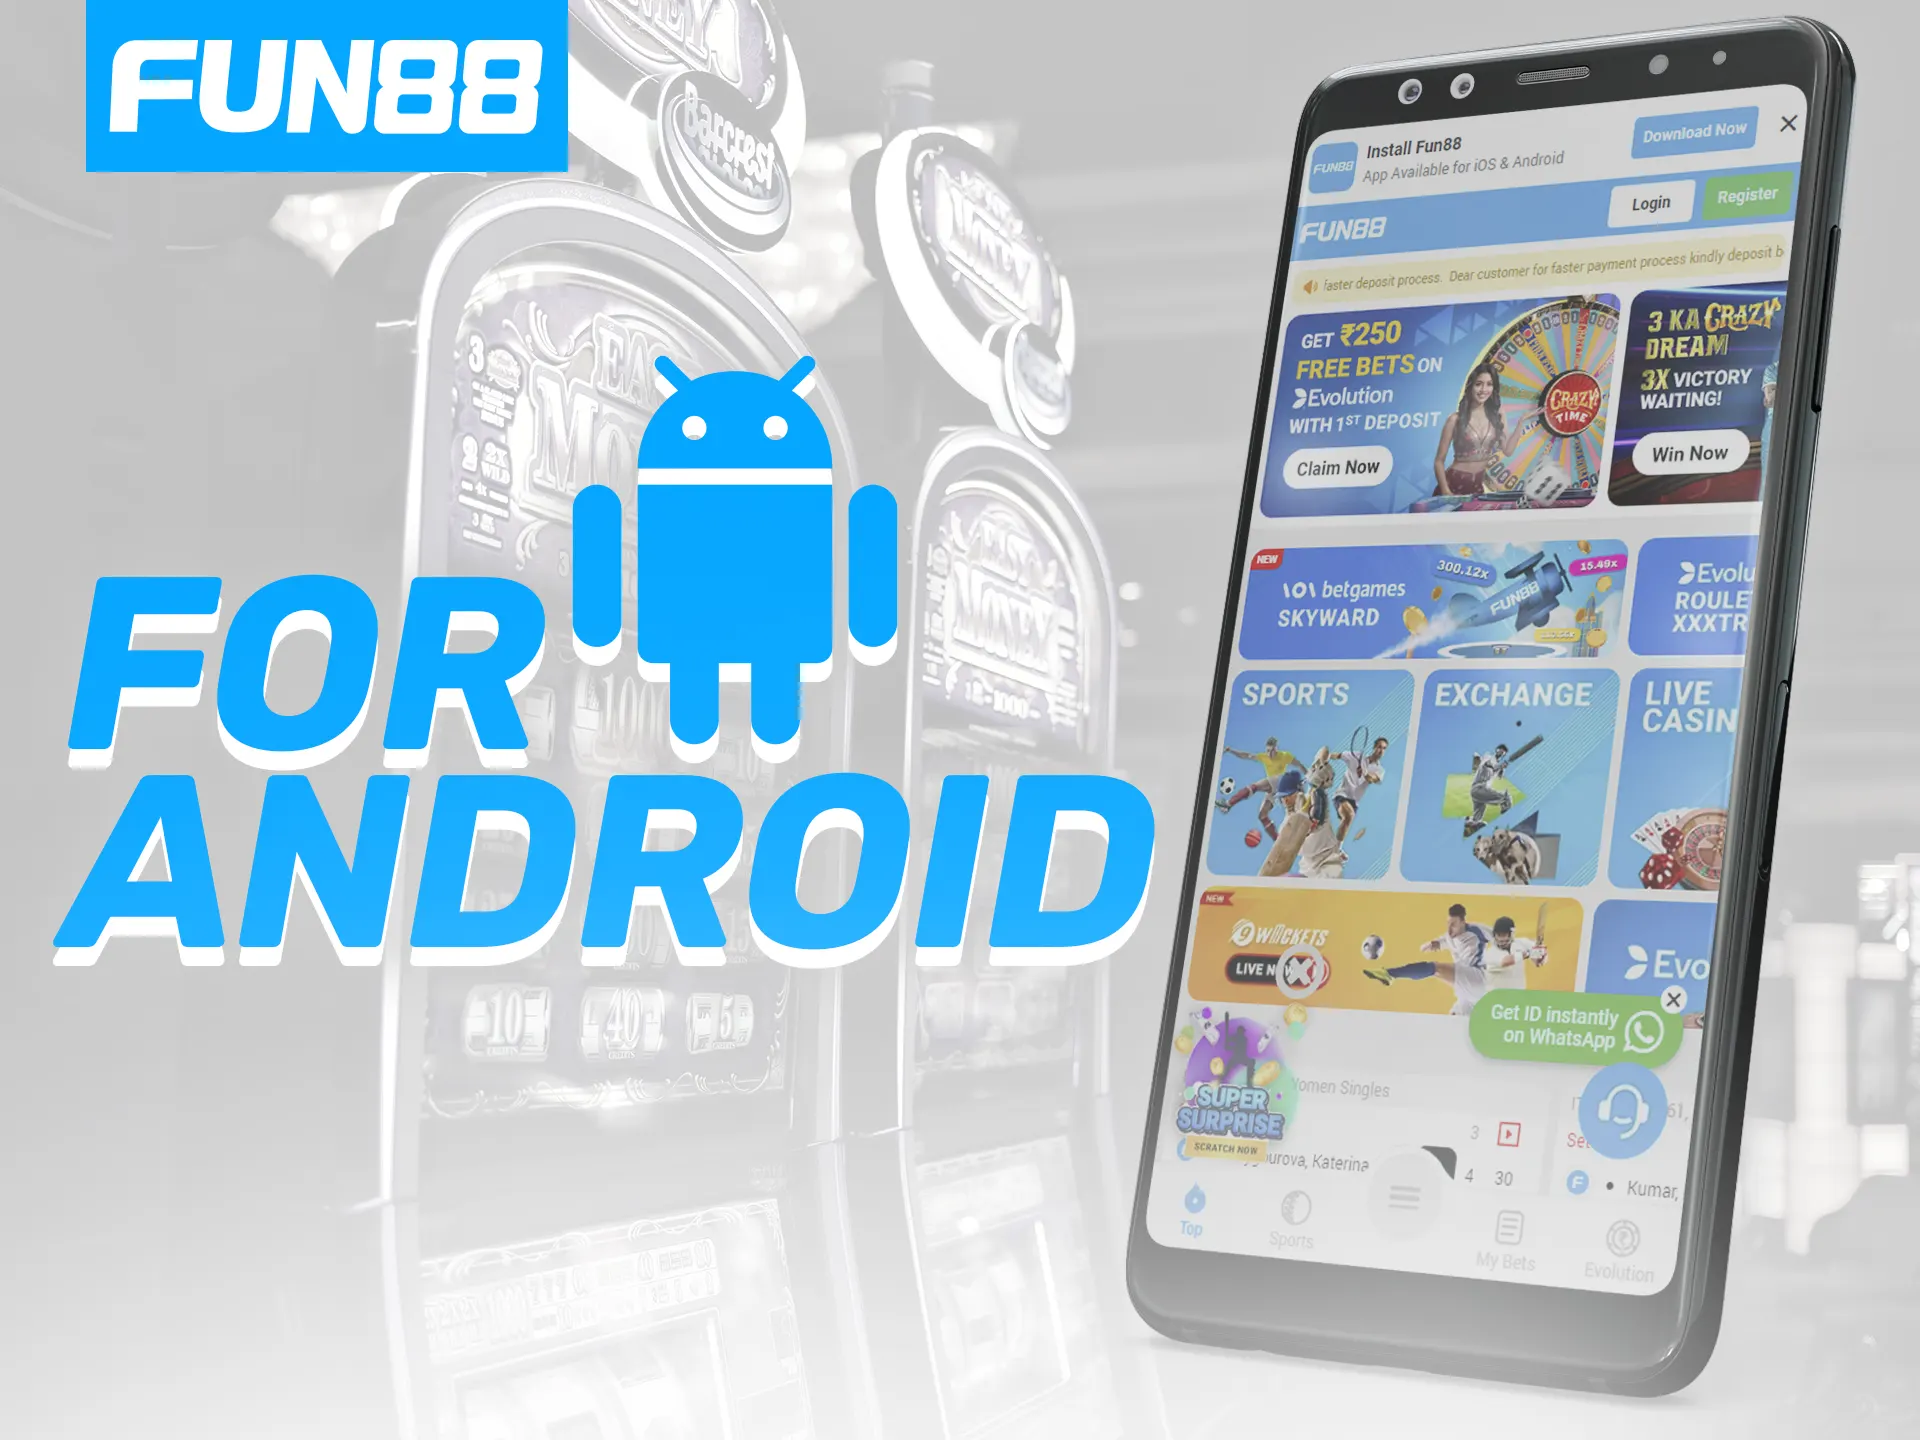 Fun88 Android app is available for download at official website.